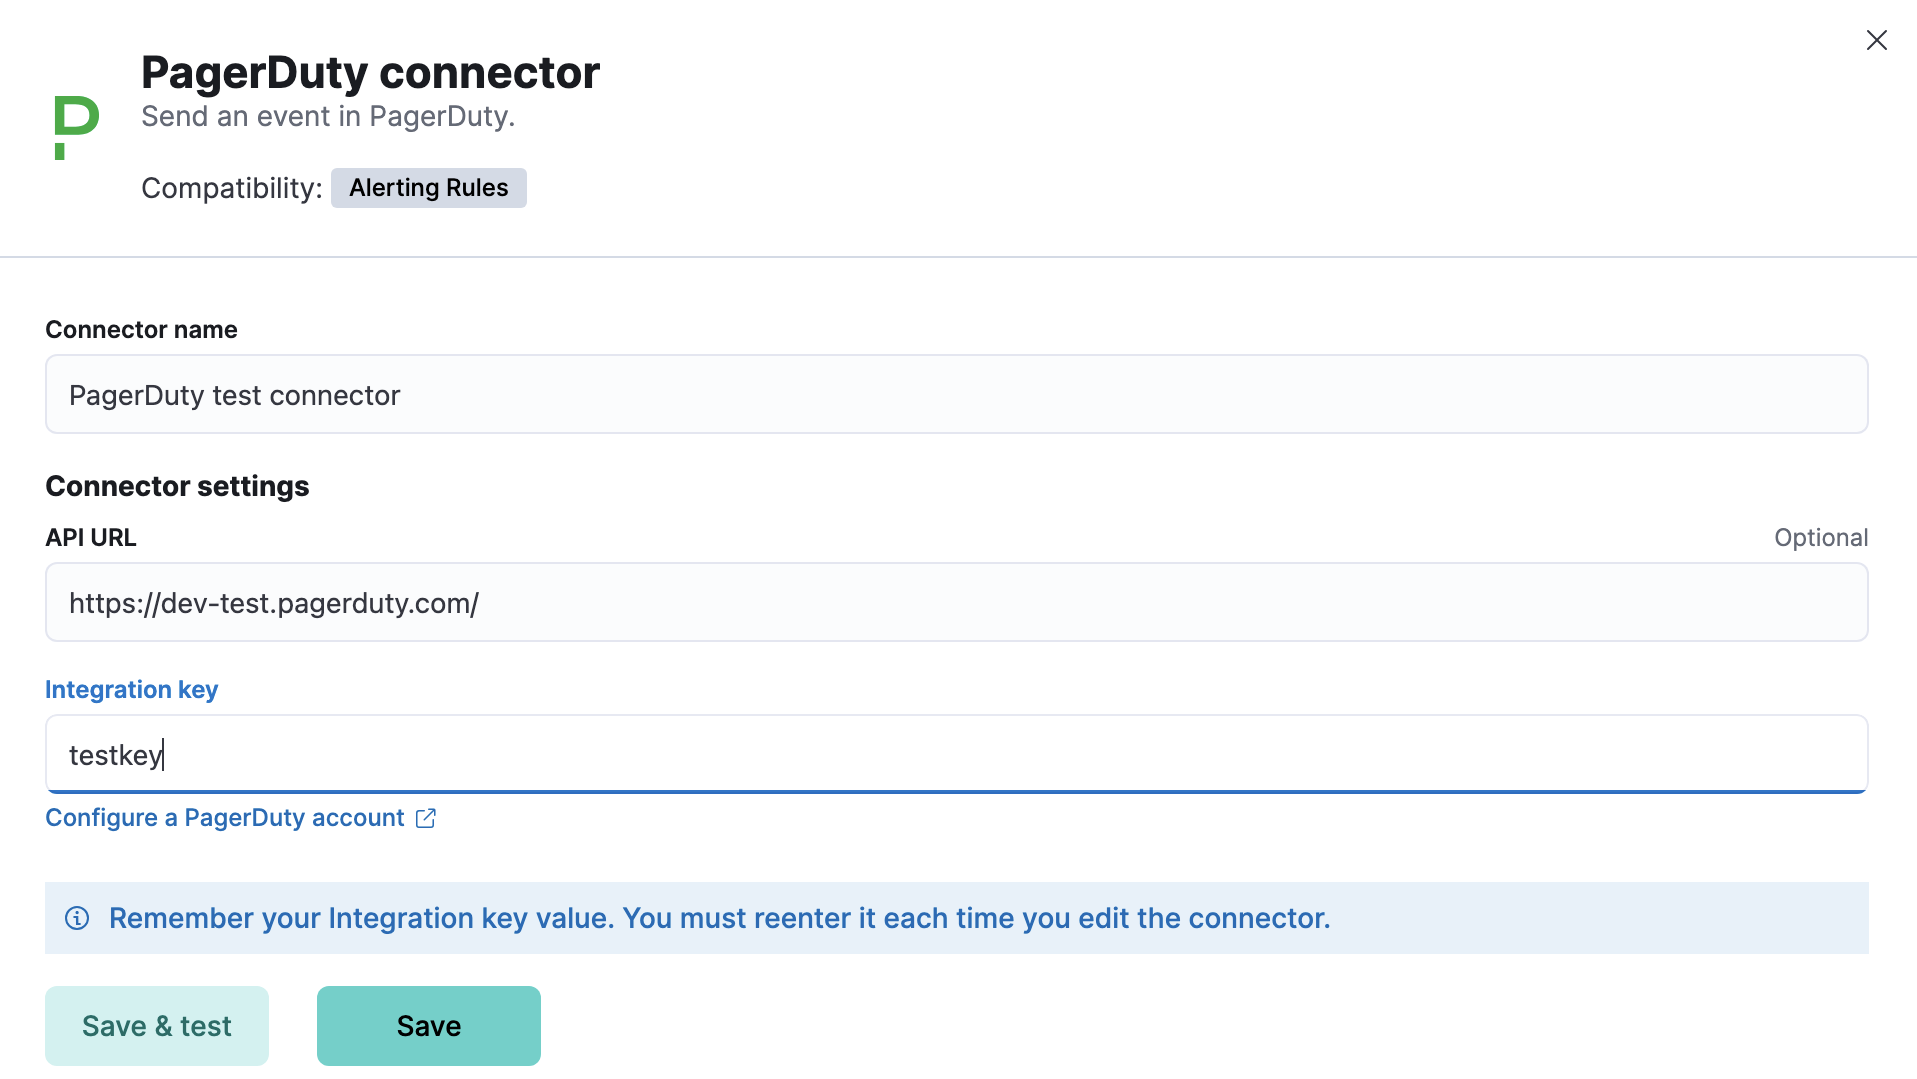 PagerDuty connector